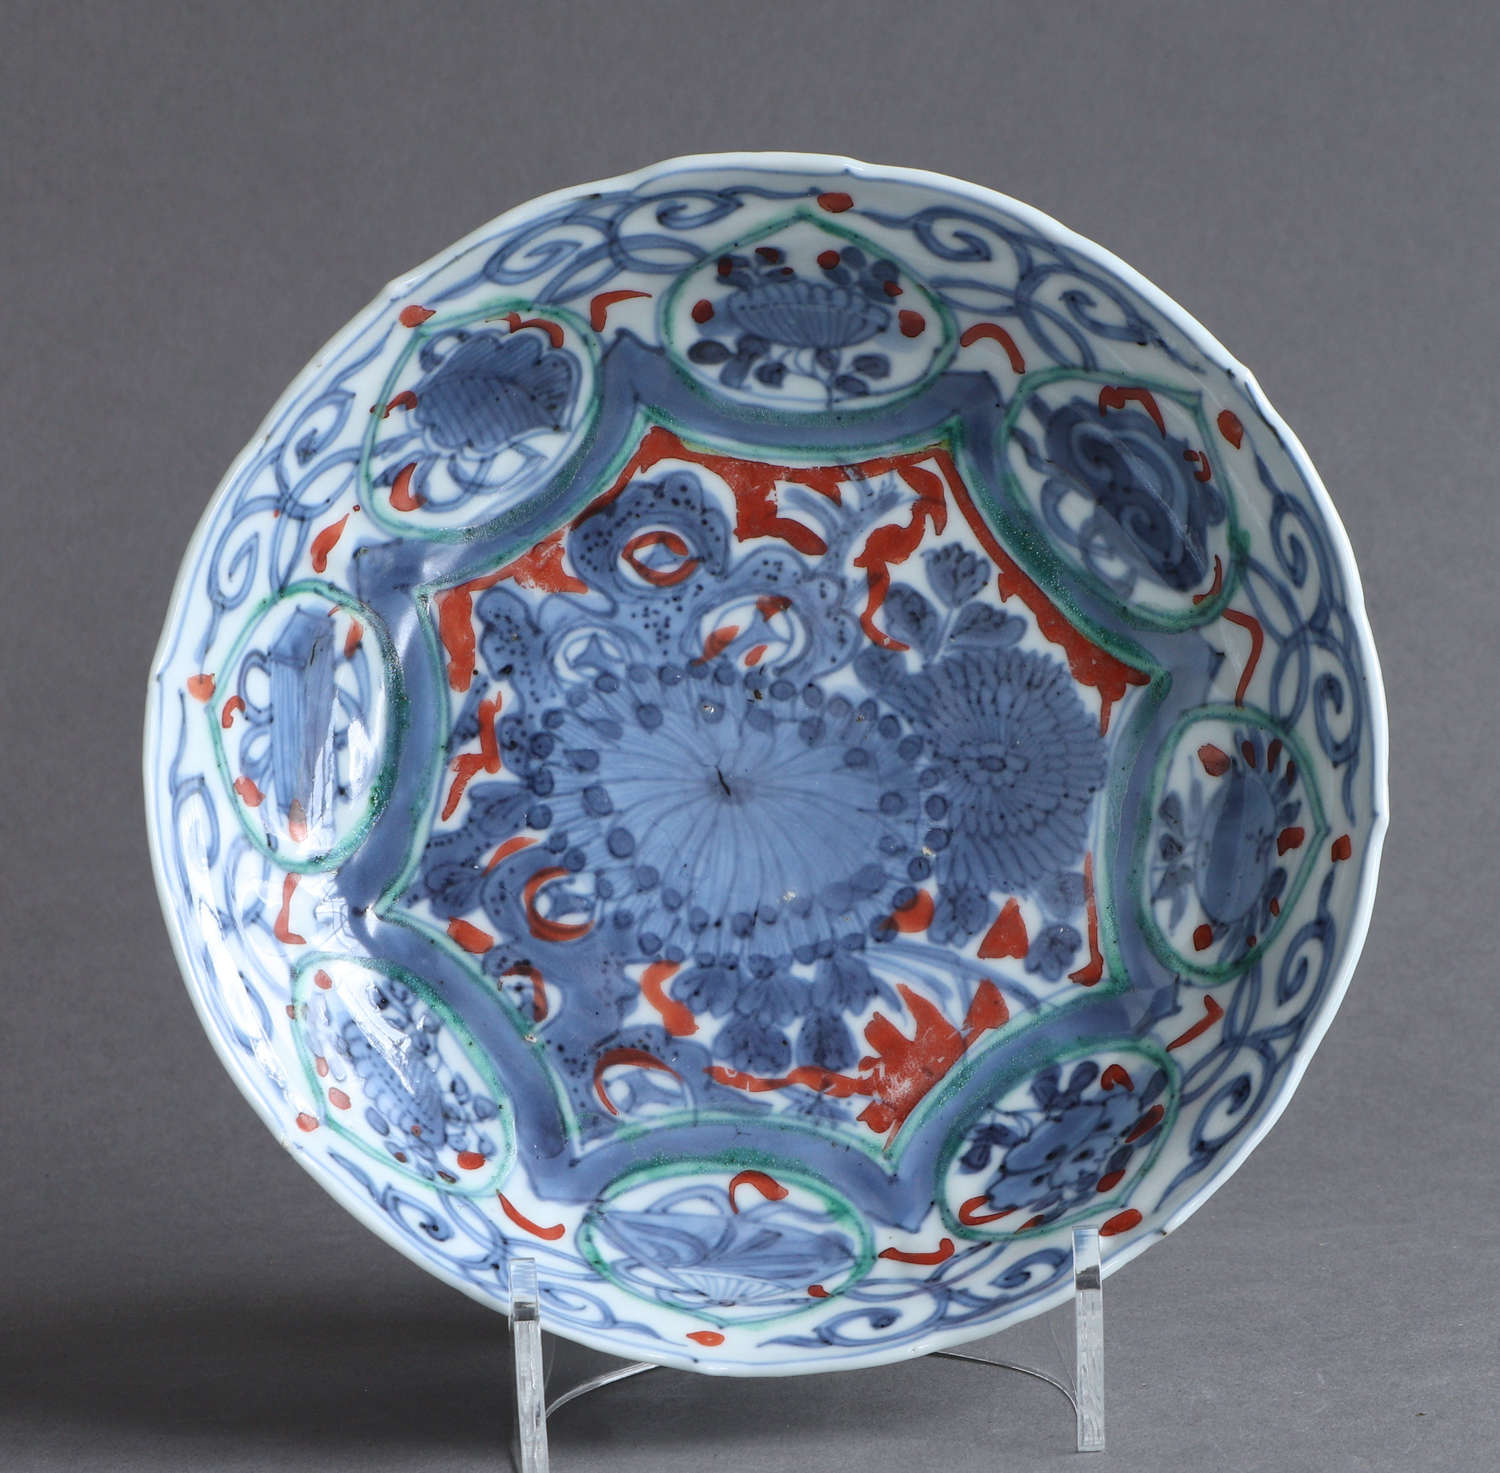 A European-decorated Chinese Kraak dish, late Ming